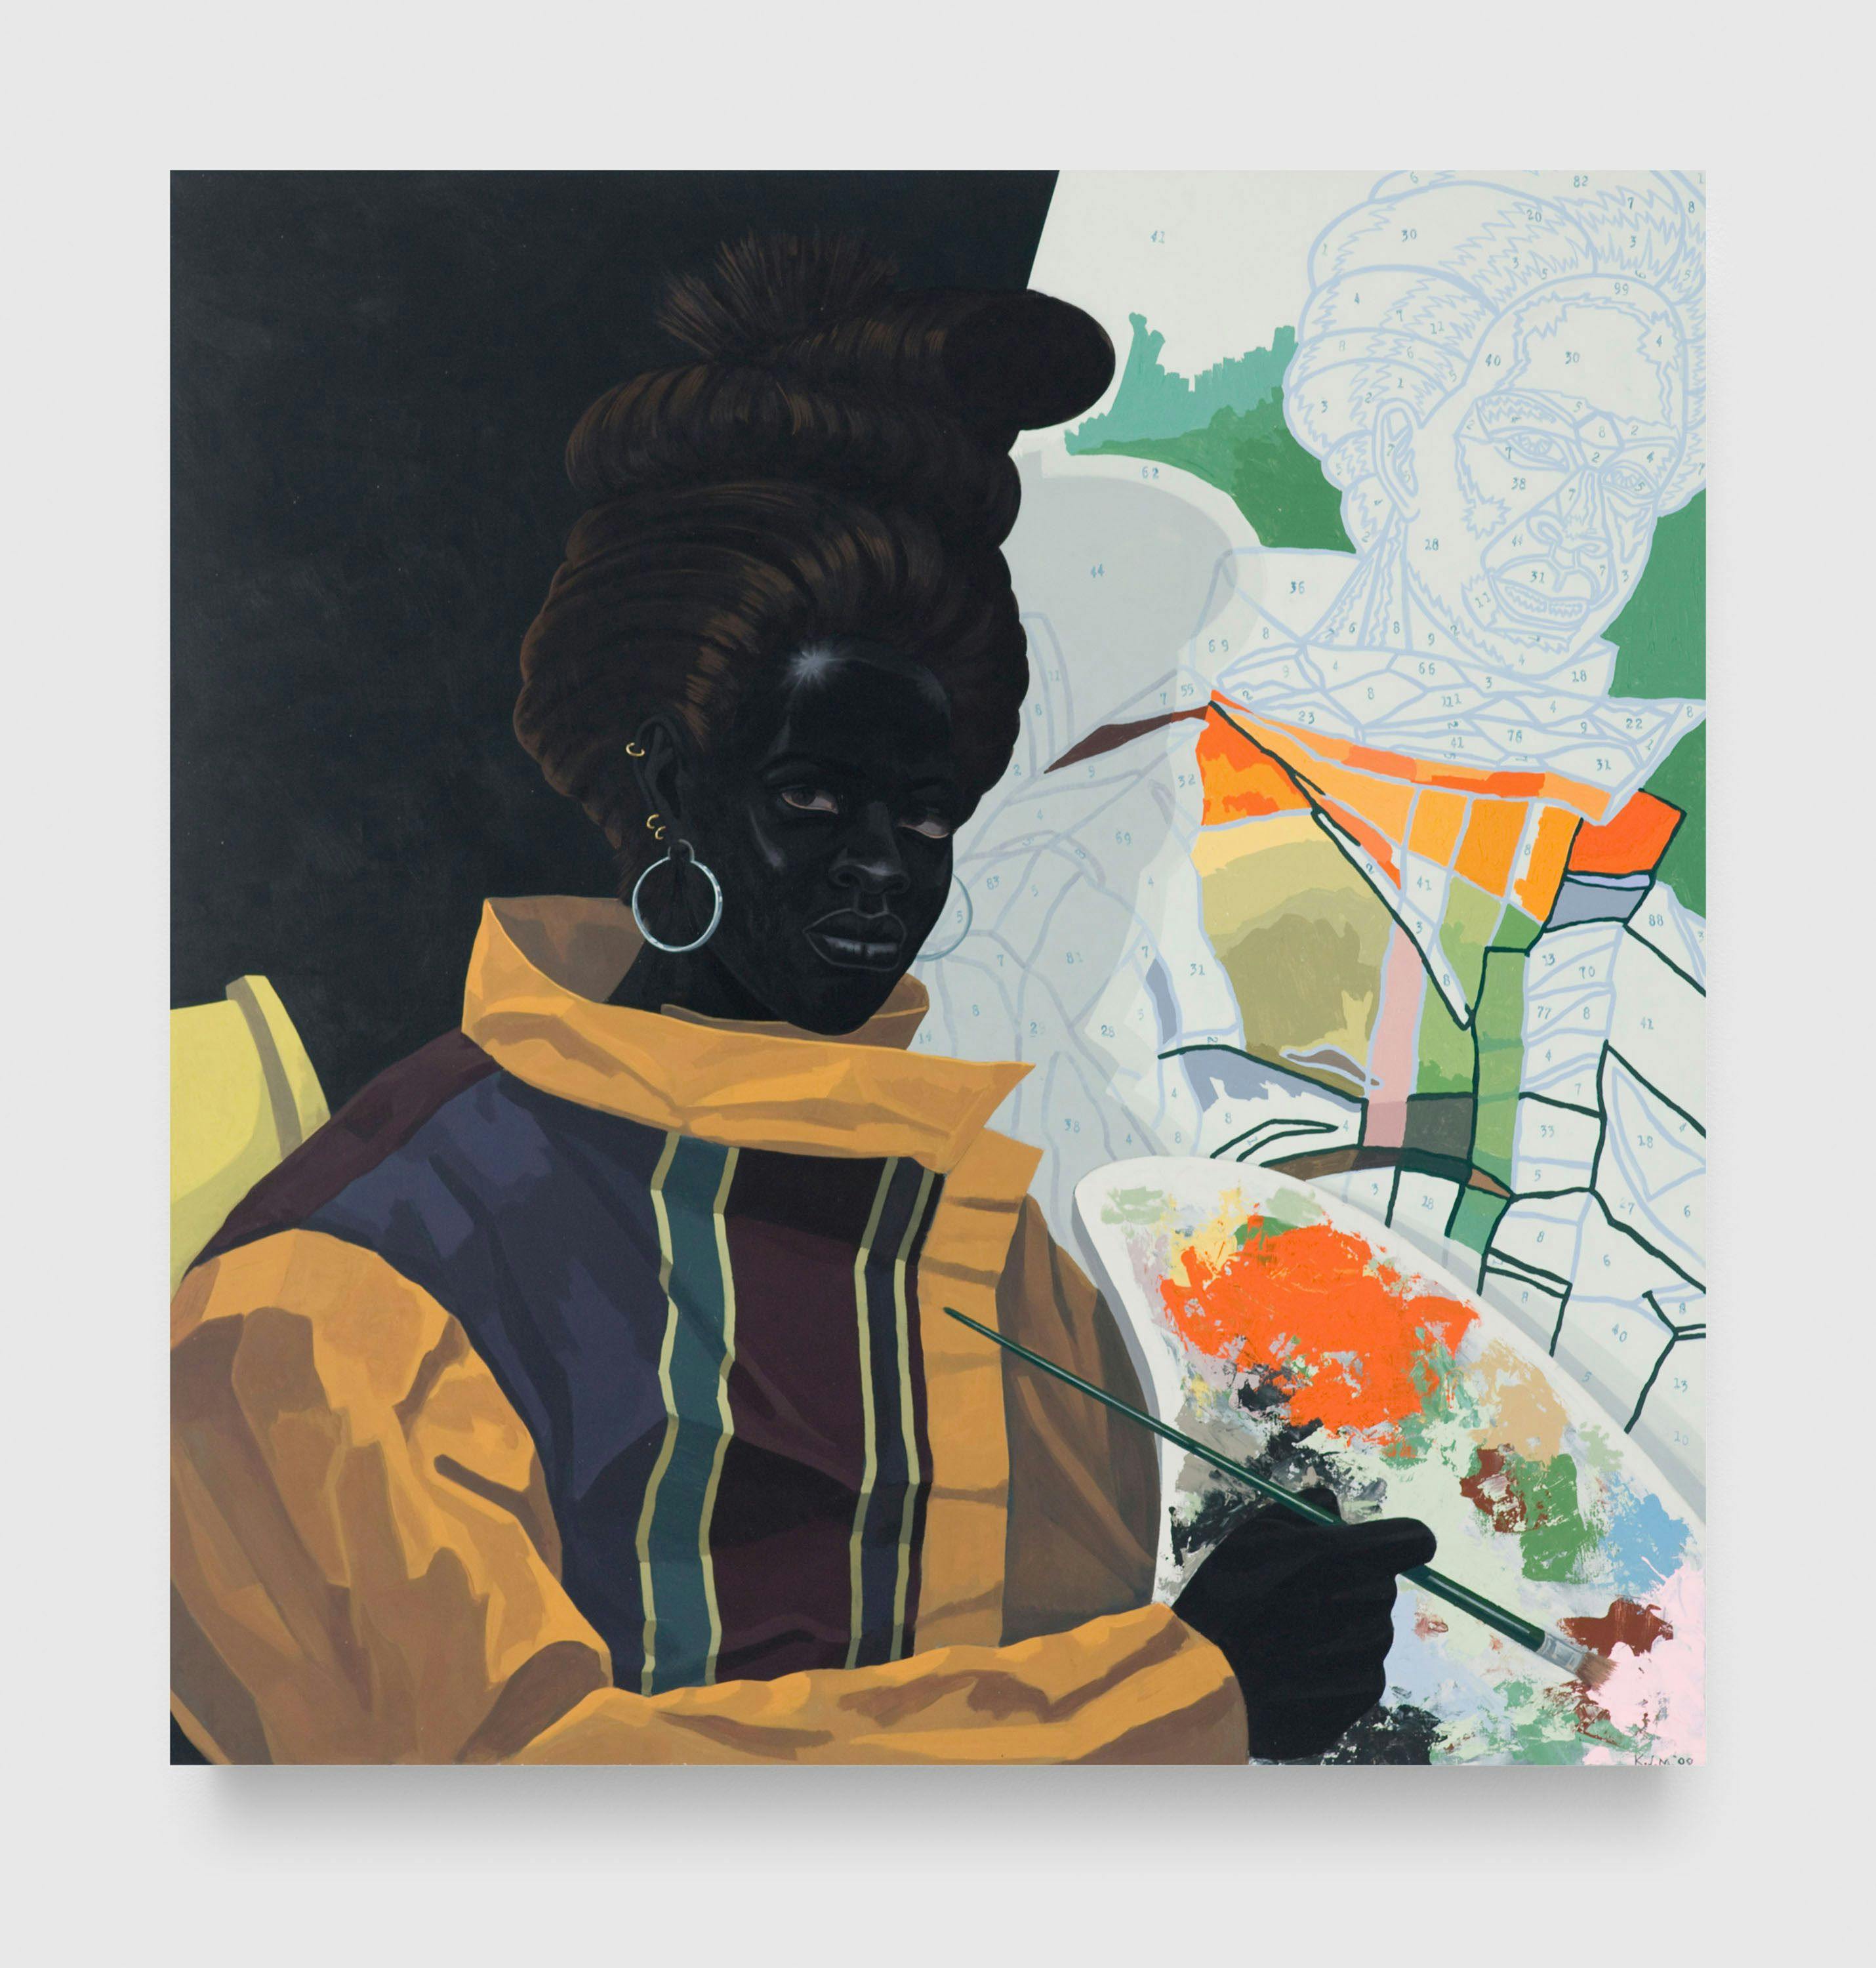 A painting by Kerry James Marshall, called Untitled (Painter), dated 2009.